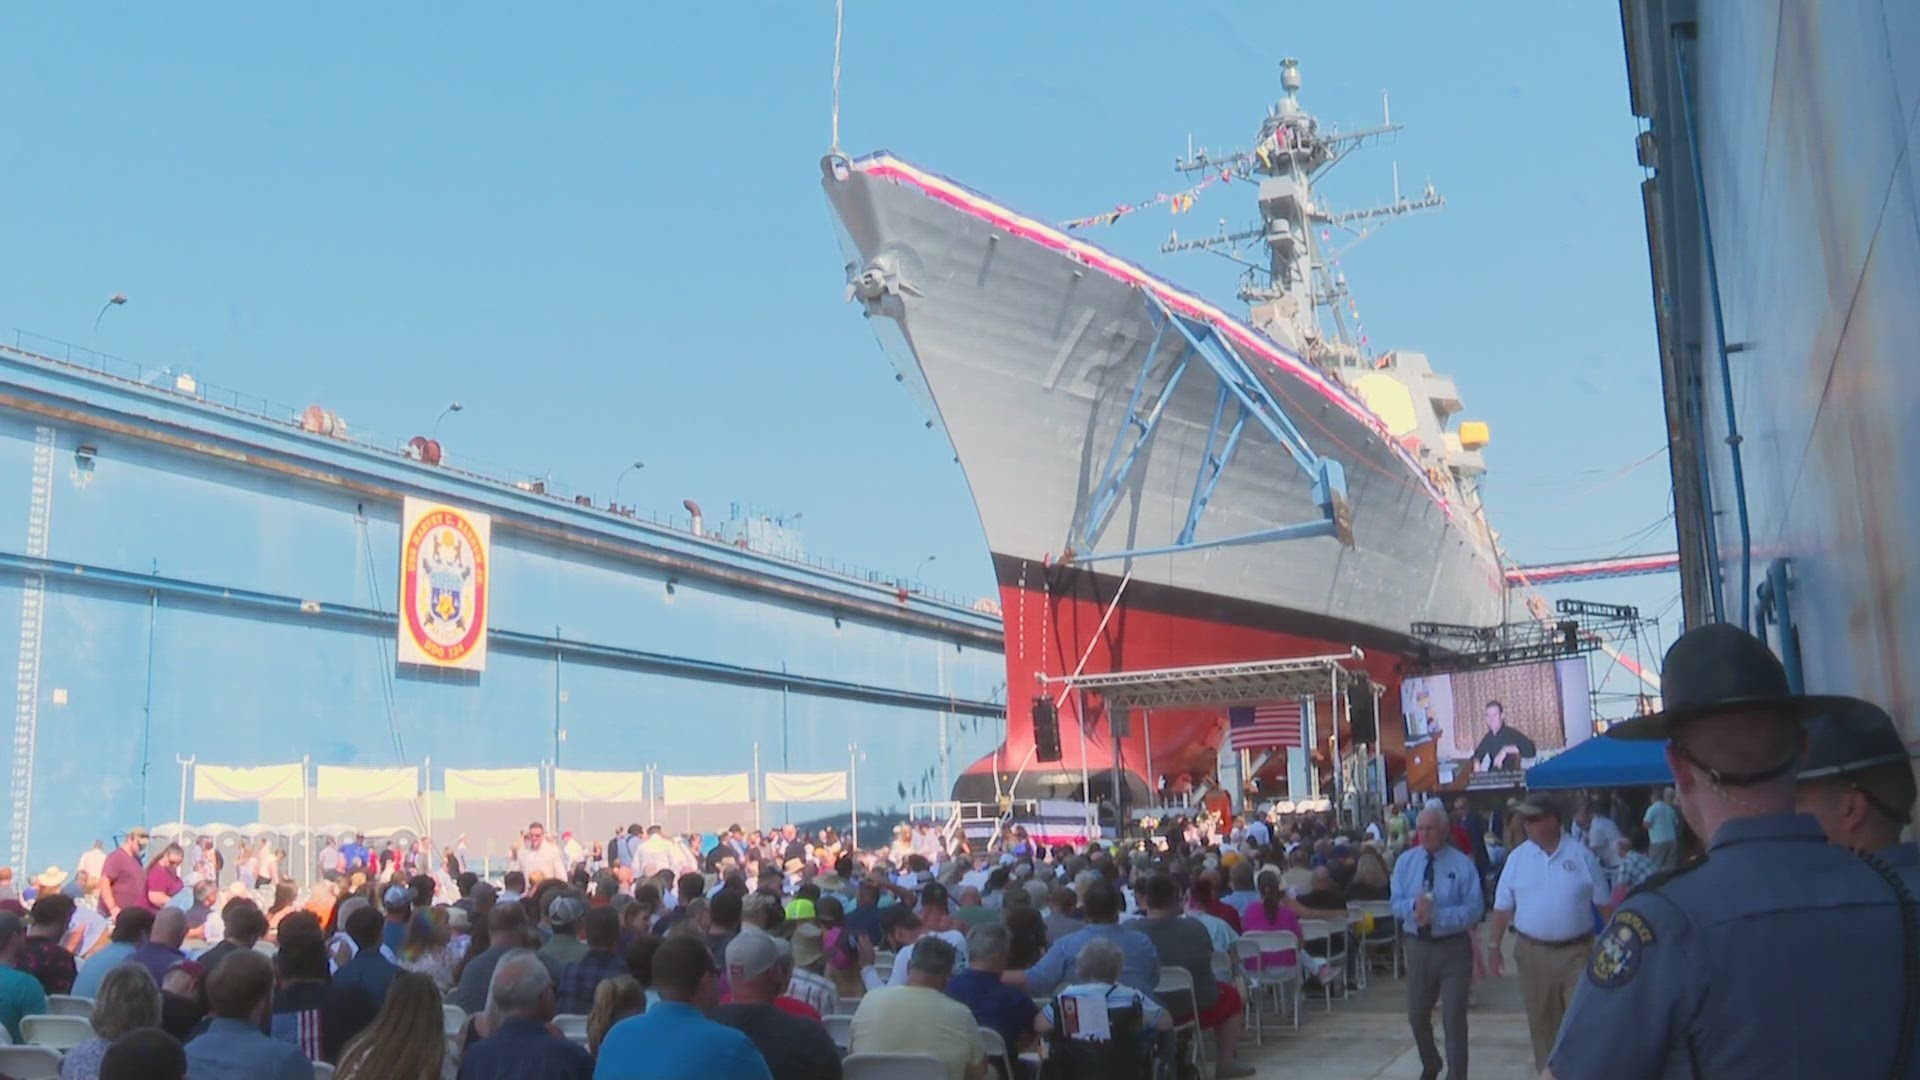 Col. Harvey Barnum was on hand to christen the Navy’s latest destroyer that will carry his name.